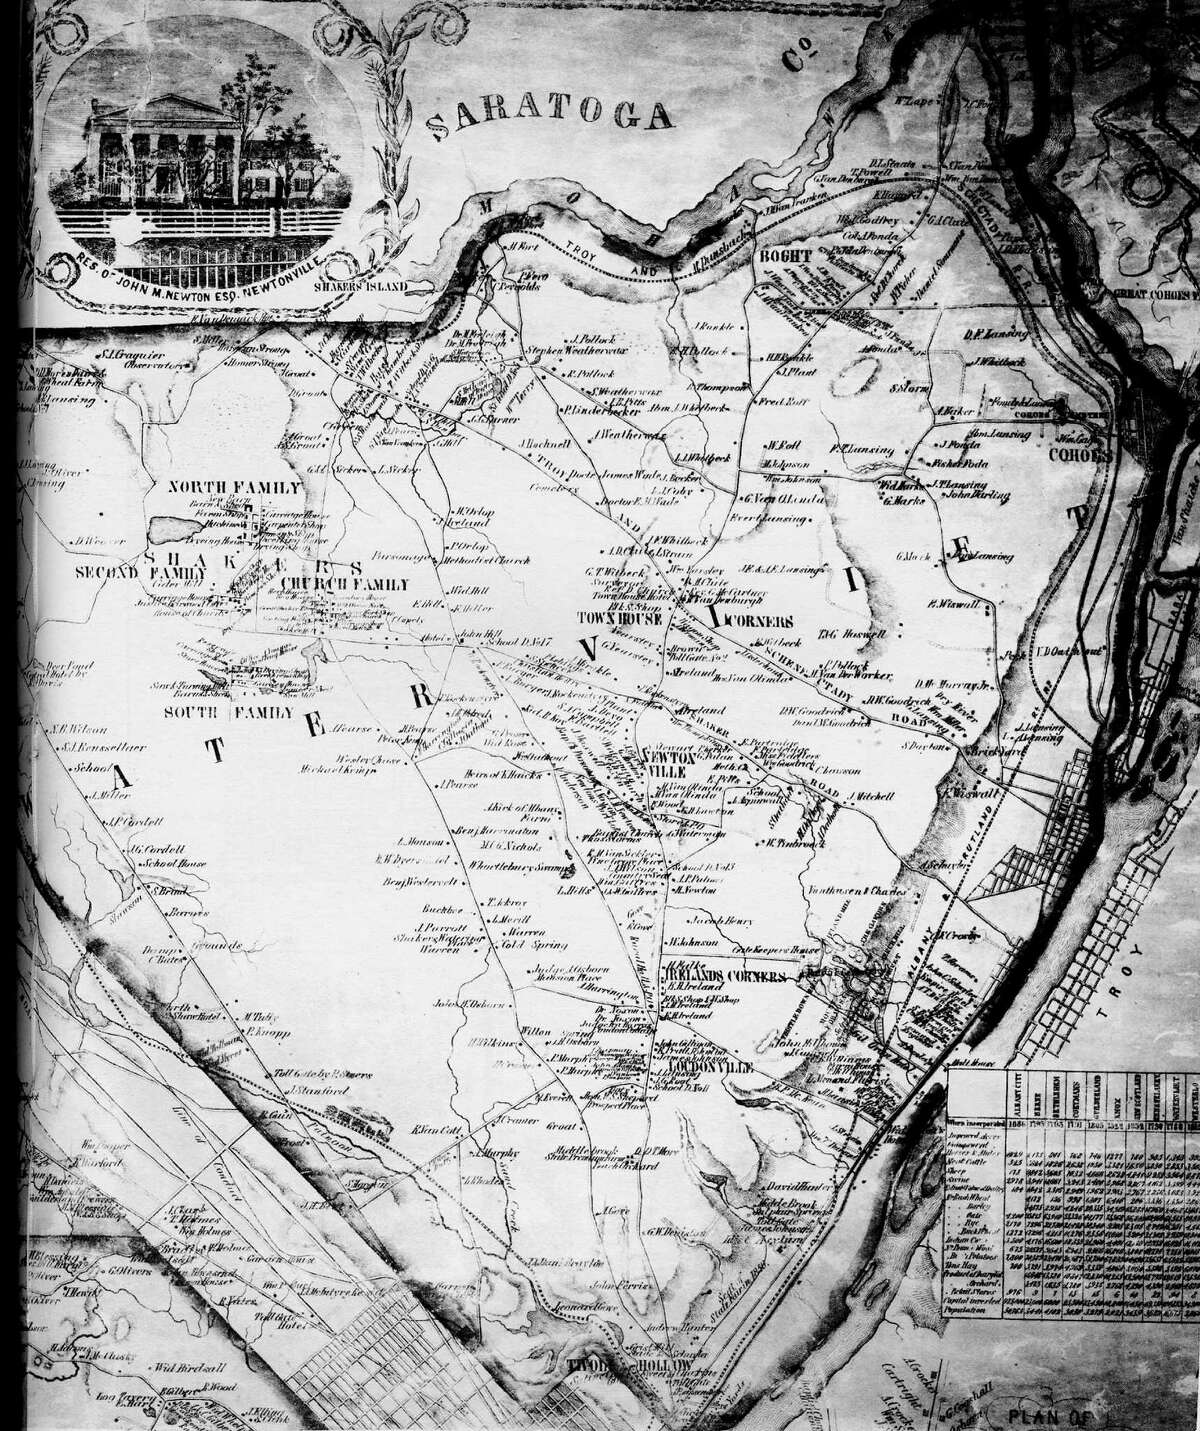 1854 map of what was then called "Watervliet" but is now Colonie.